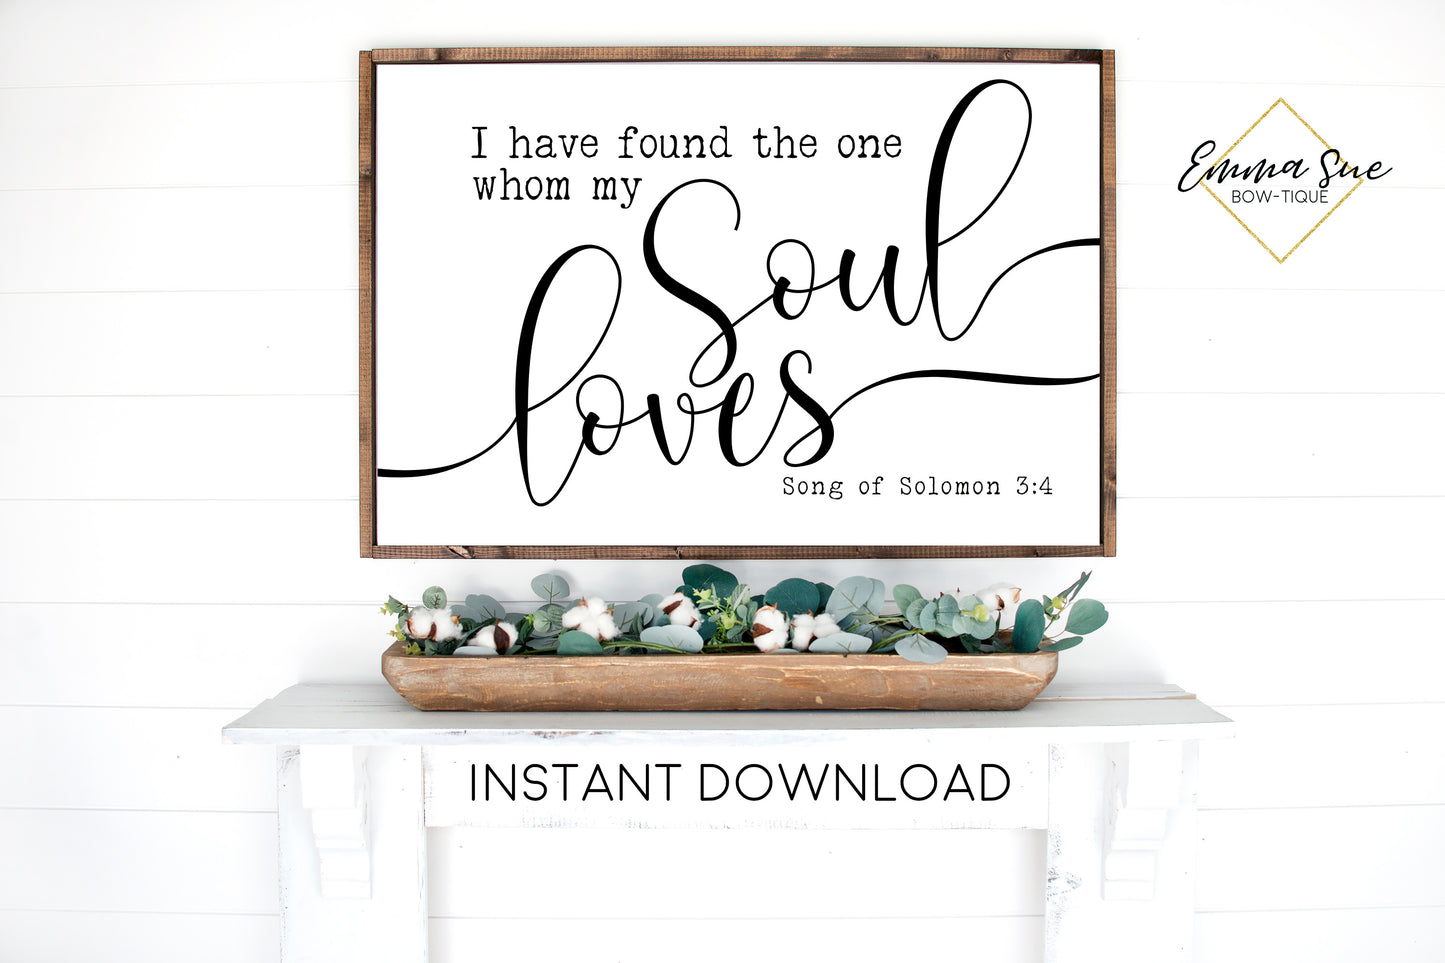 I have found the one whom my soul loves - Song of Solomon 3:4 Bible Verse Printable Sign Wall Art